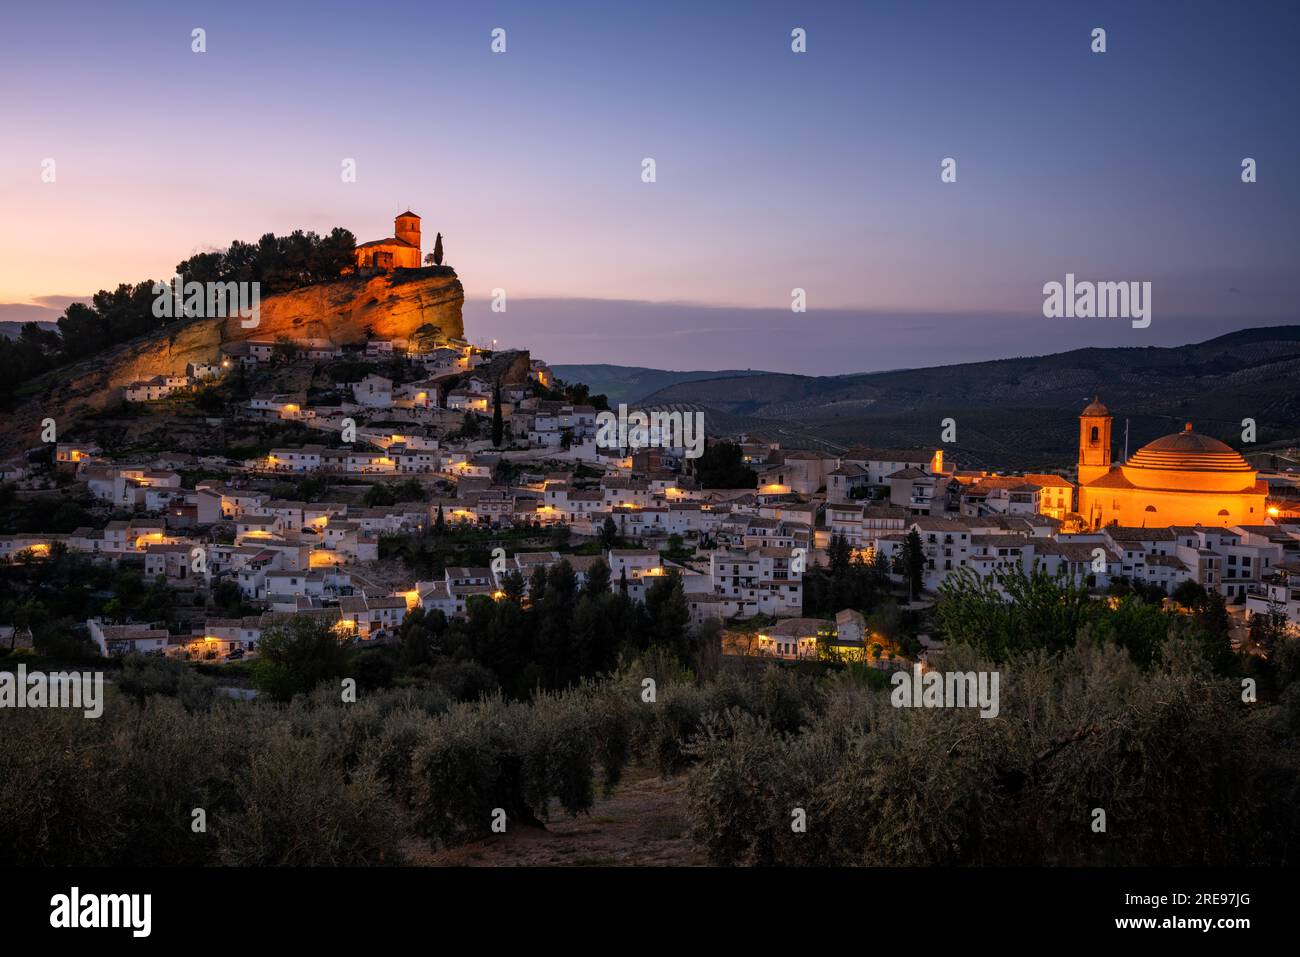 Picturesque view of aged town on hill with stone buildings and green trees under cloudless sky at sunset in n Montefrio village, Pueblos Blancos in Sp Stock Photo